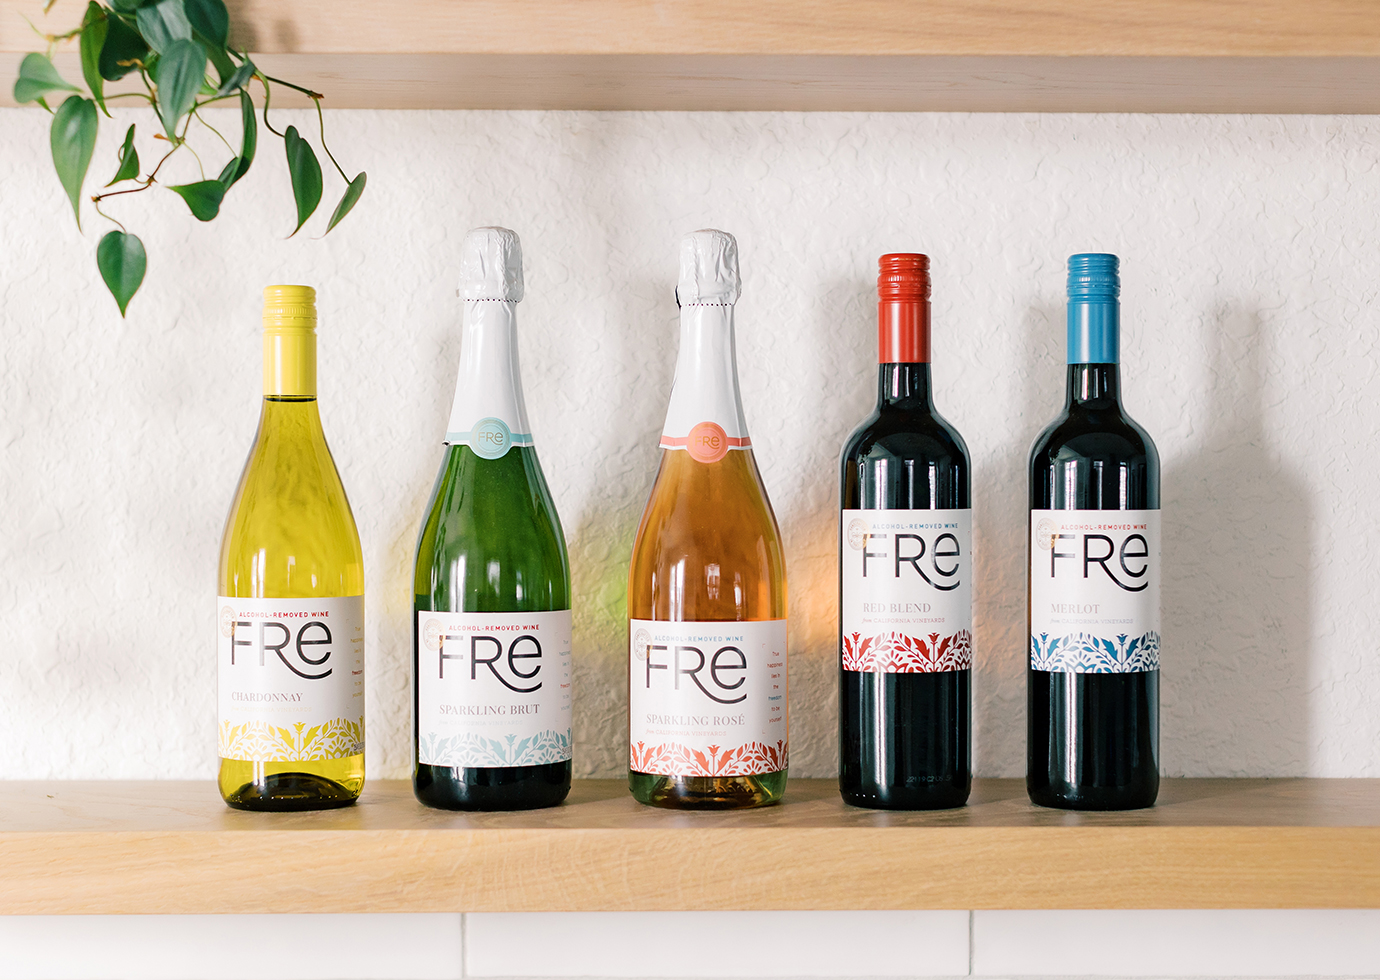 Bottles of FRE wines lined up on a bright kitchen countertop